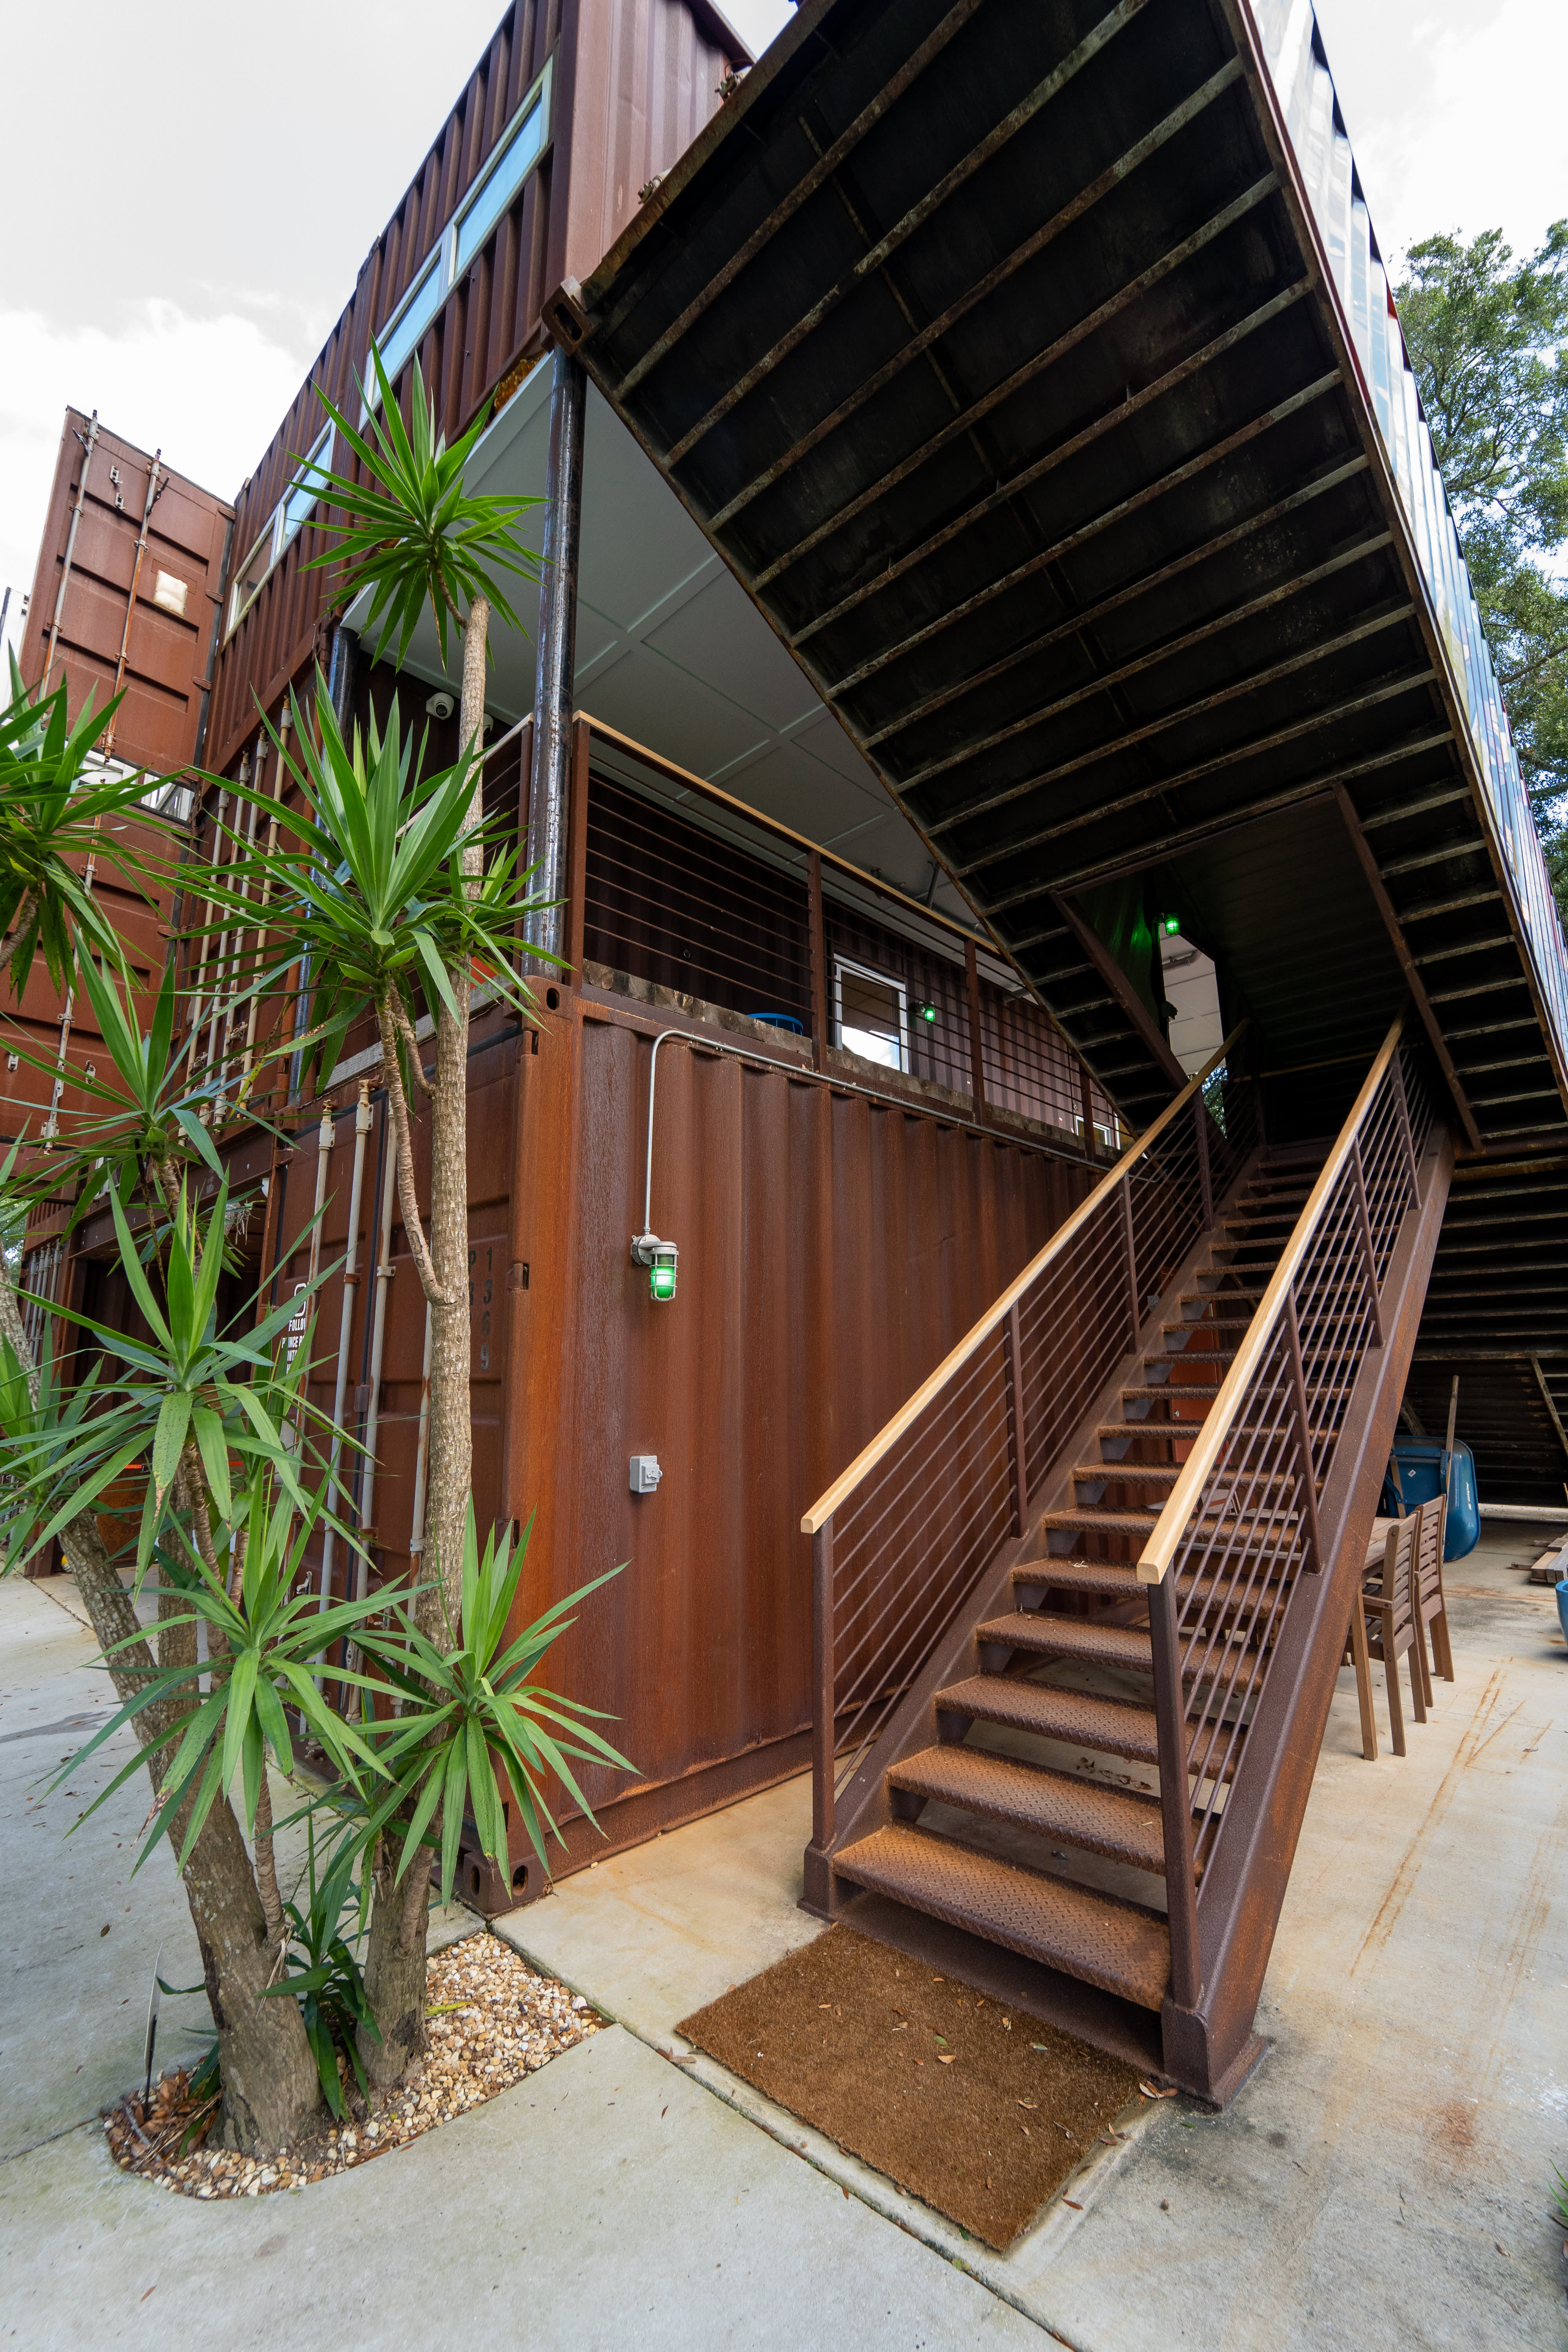 Prince Road Container House – St. Augustine, Florida - Atlas Obscura